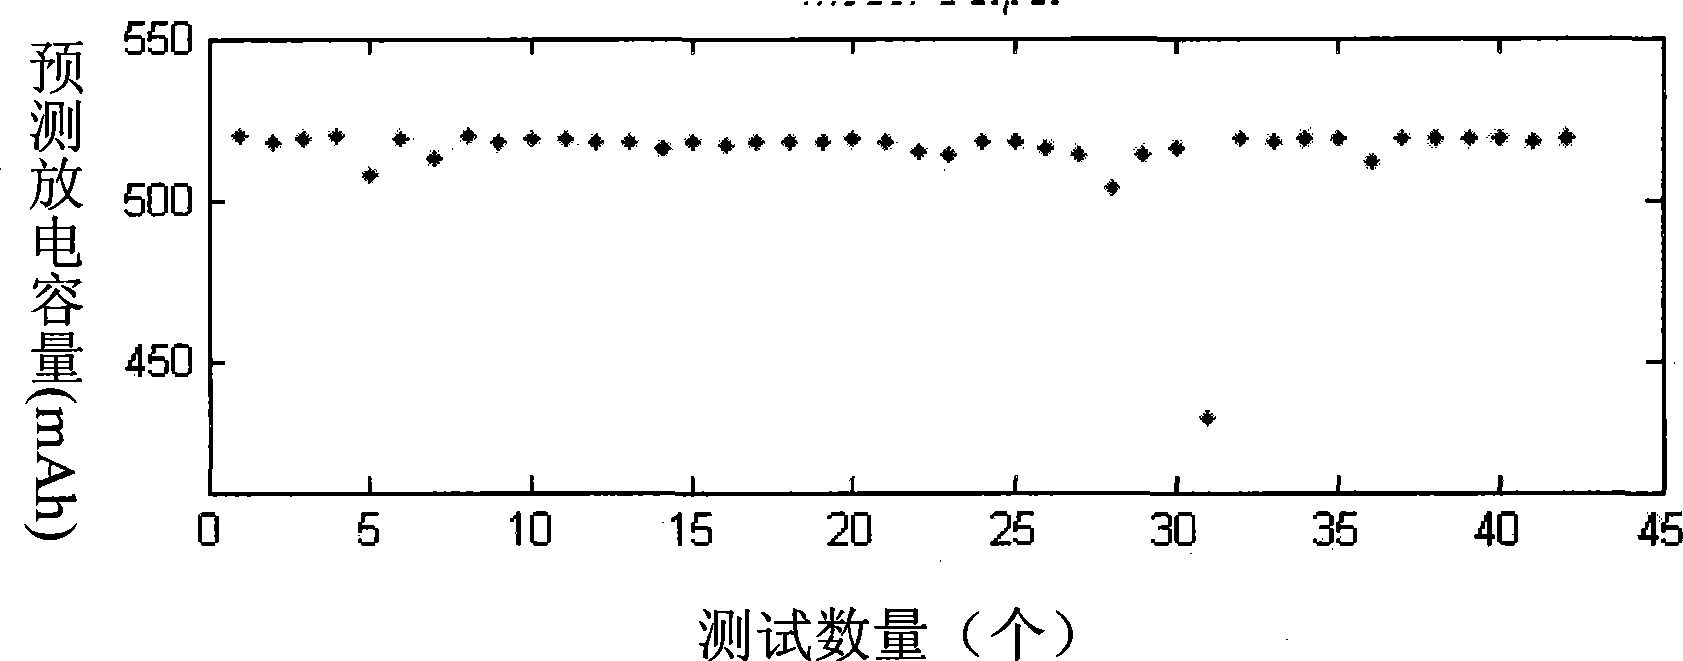 Prediction method for discharge capacity of lithium ion battery